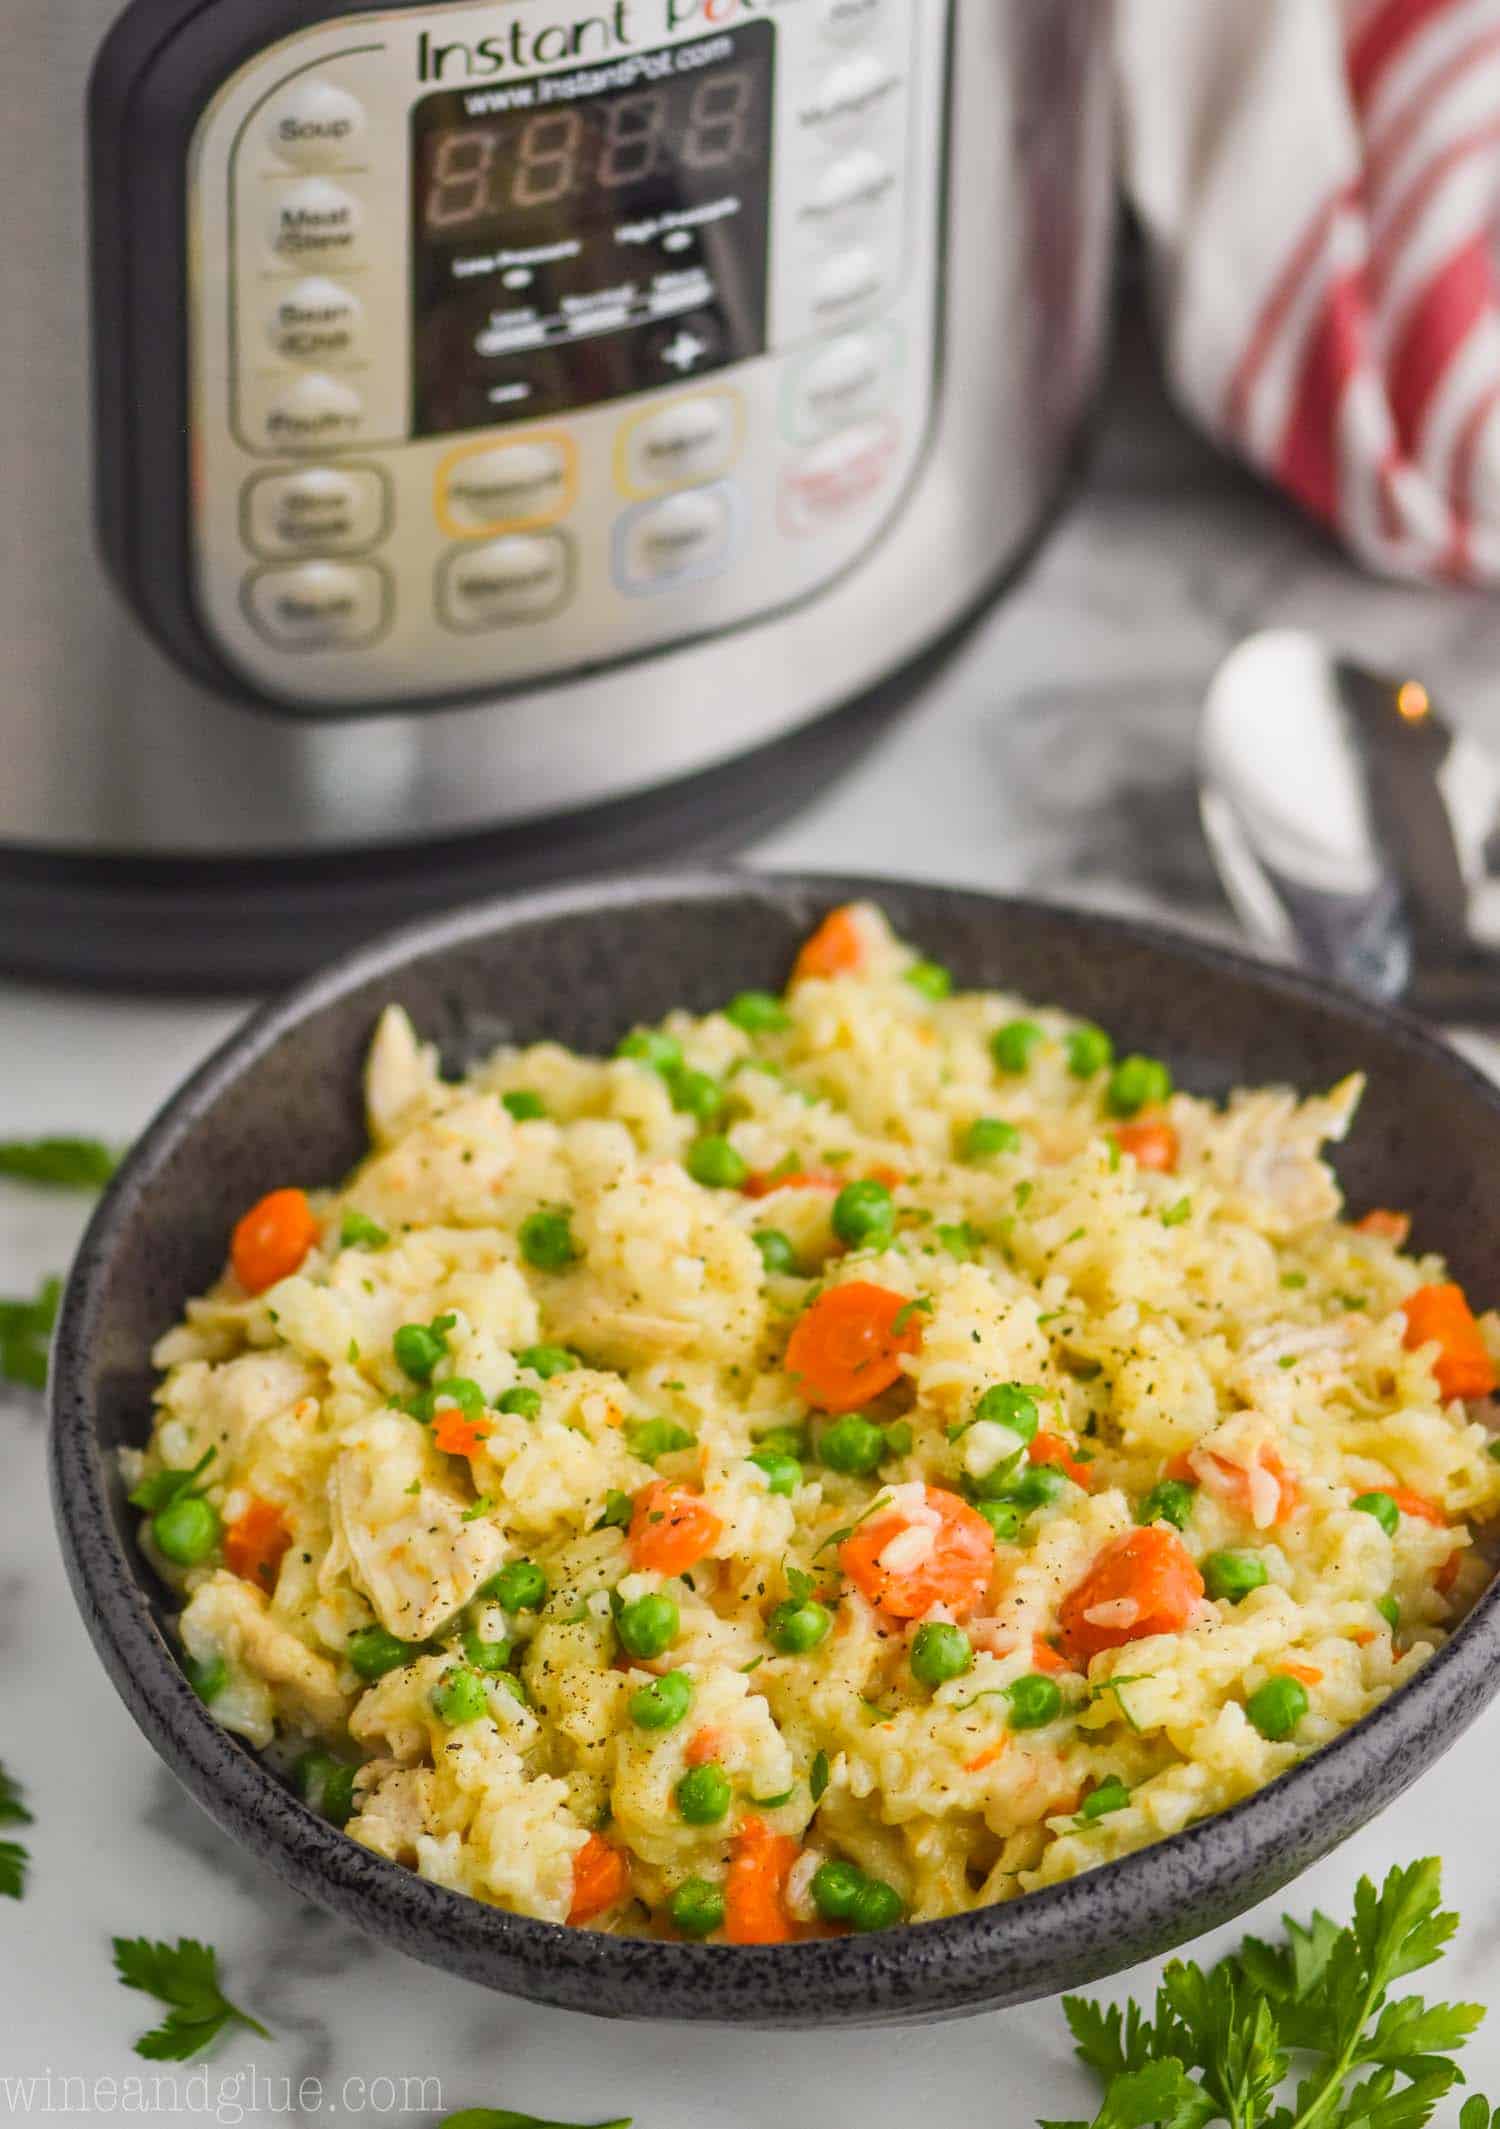 How To Make Instant Pot Rice - Hollis Homestead